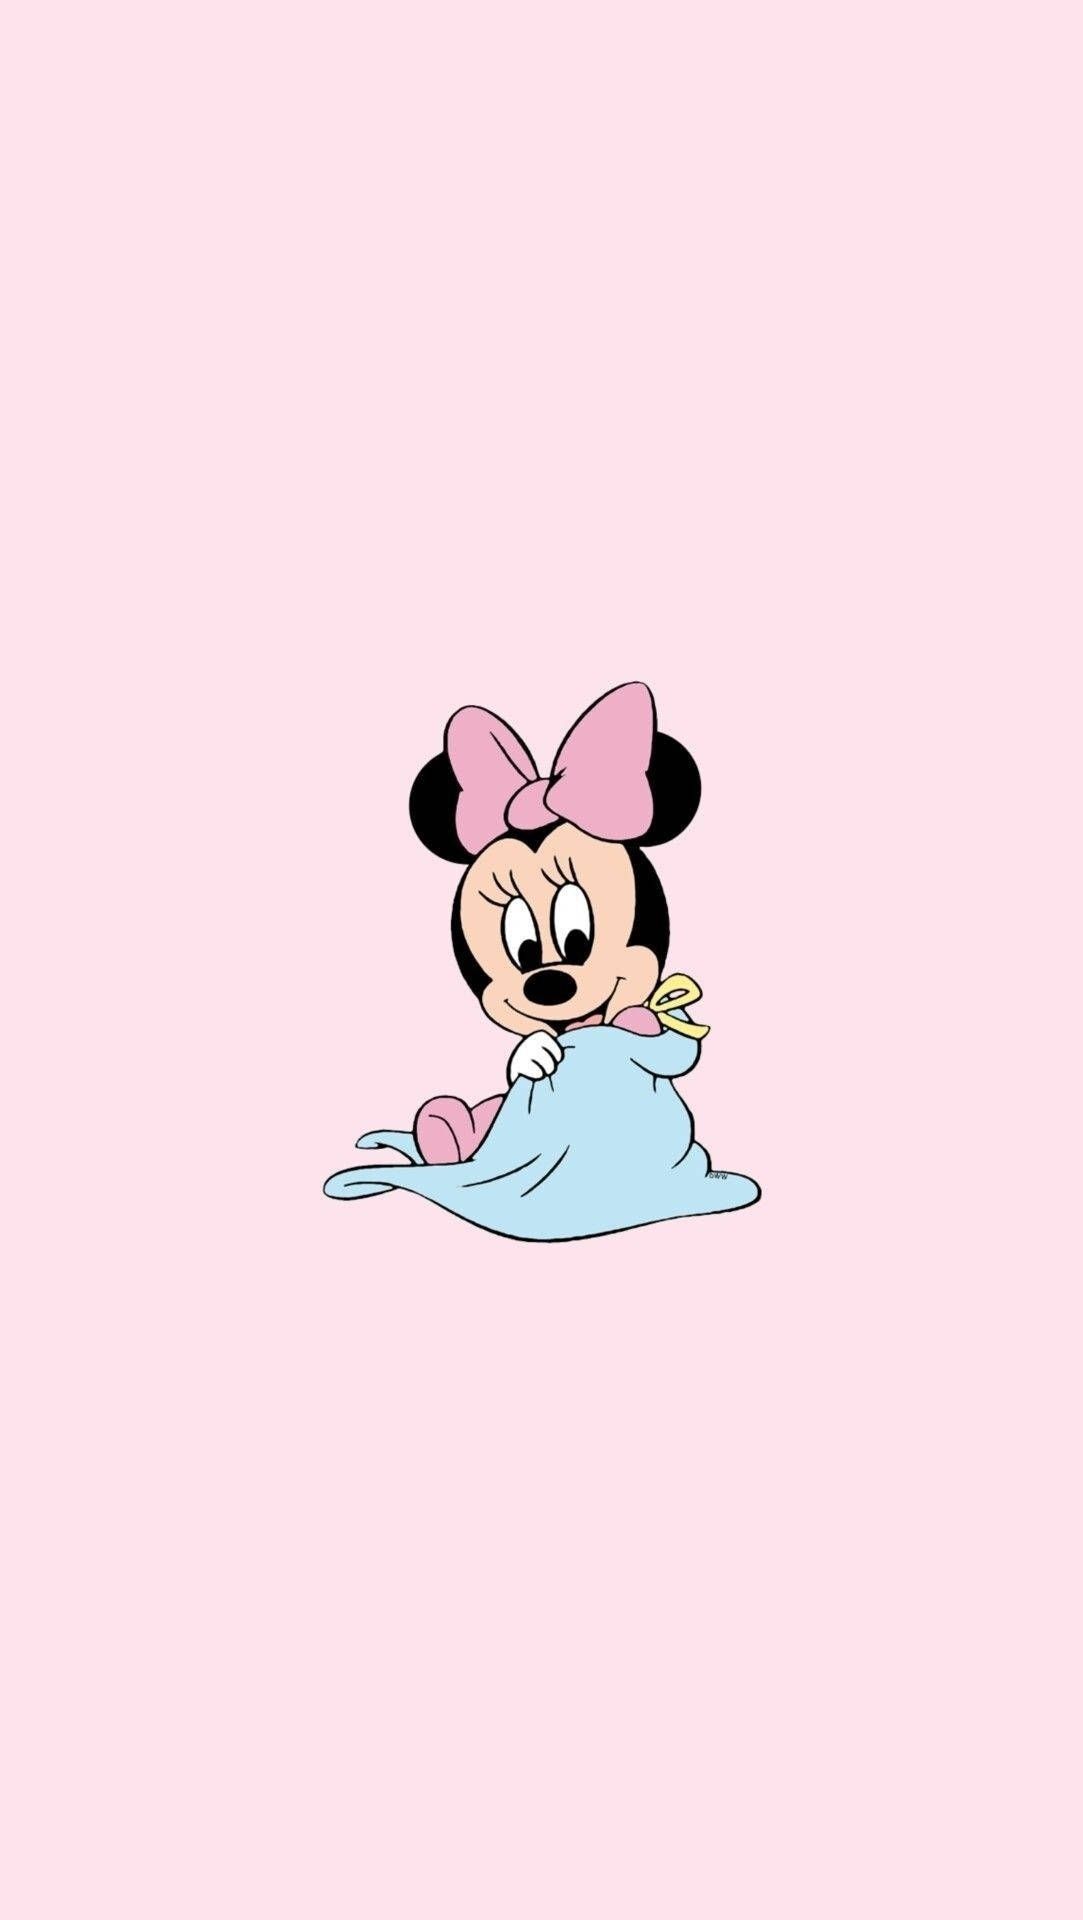 Download Cute Disney Aesthetic Minnie Mouse Wallpaper